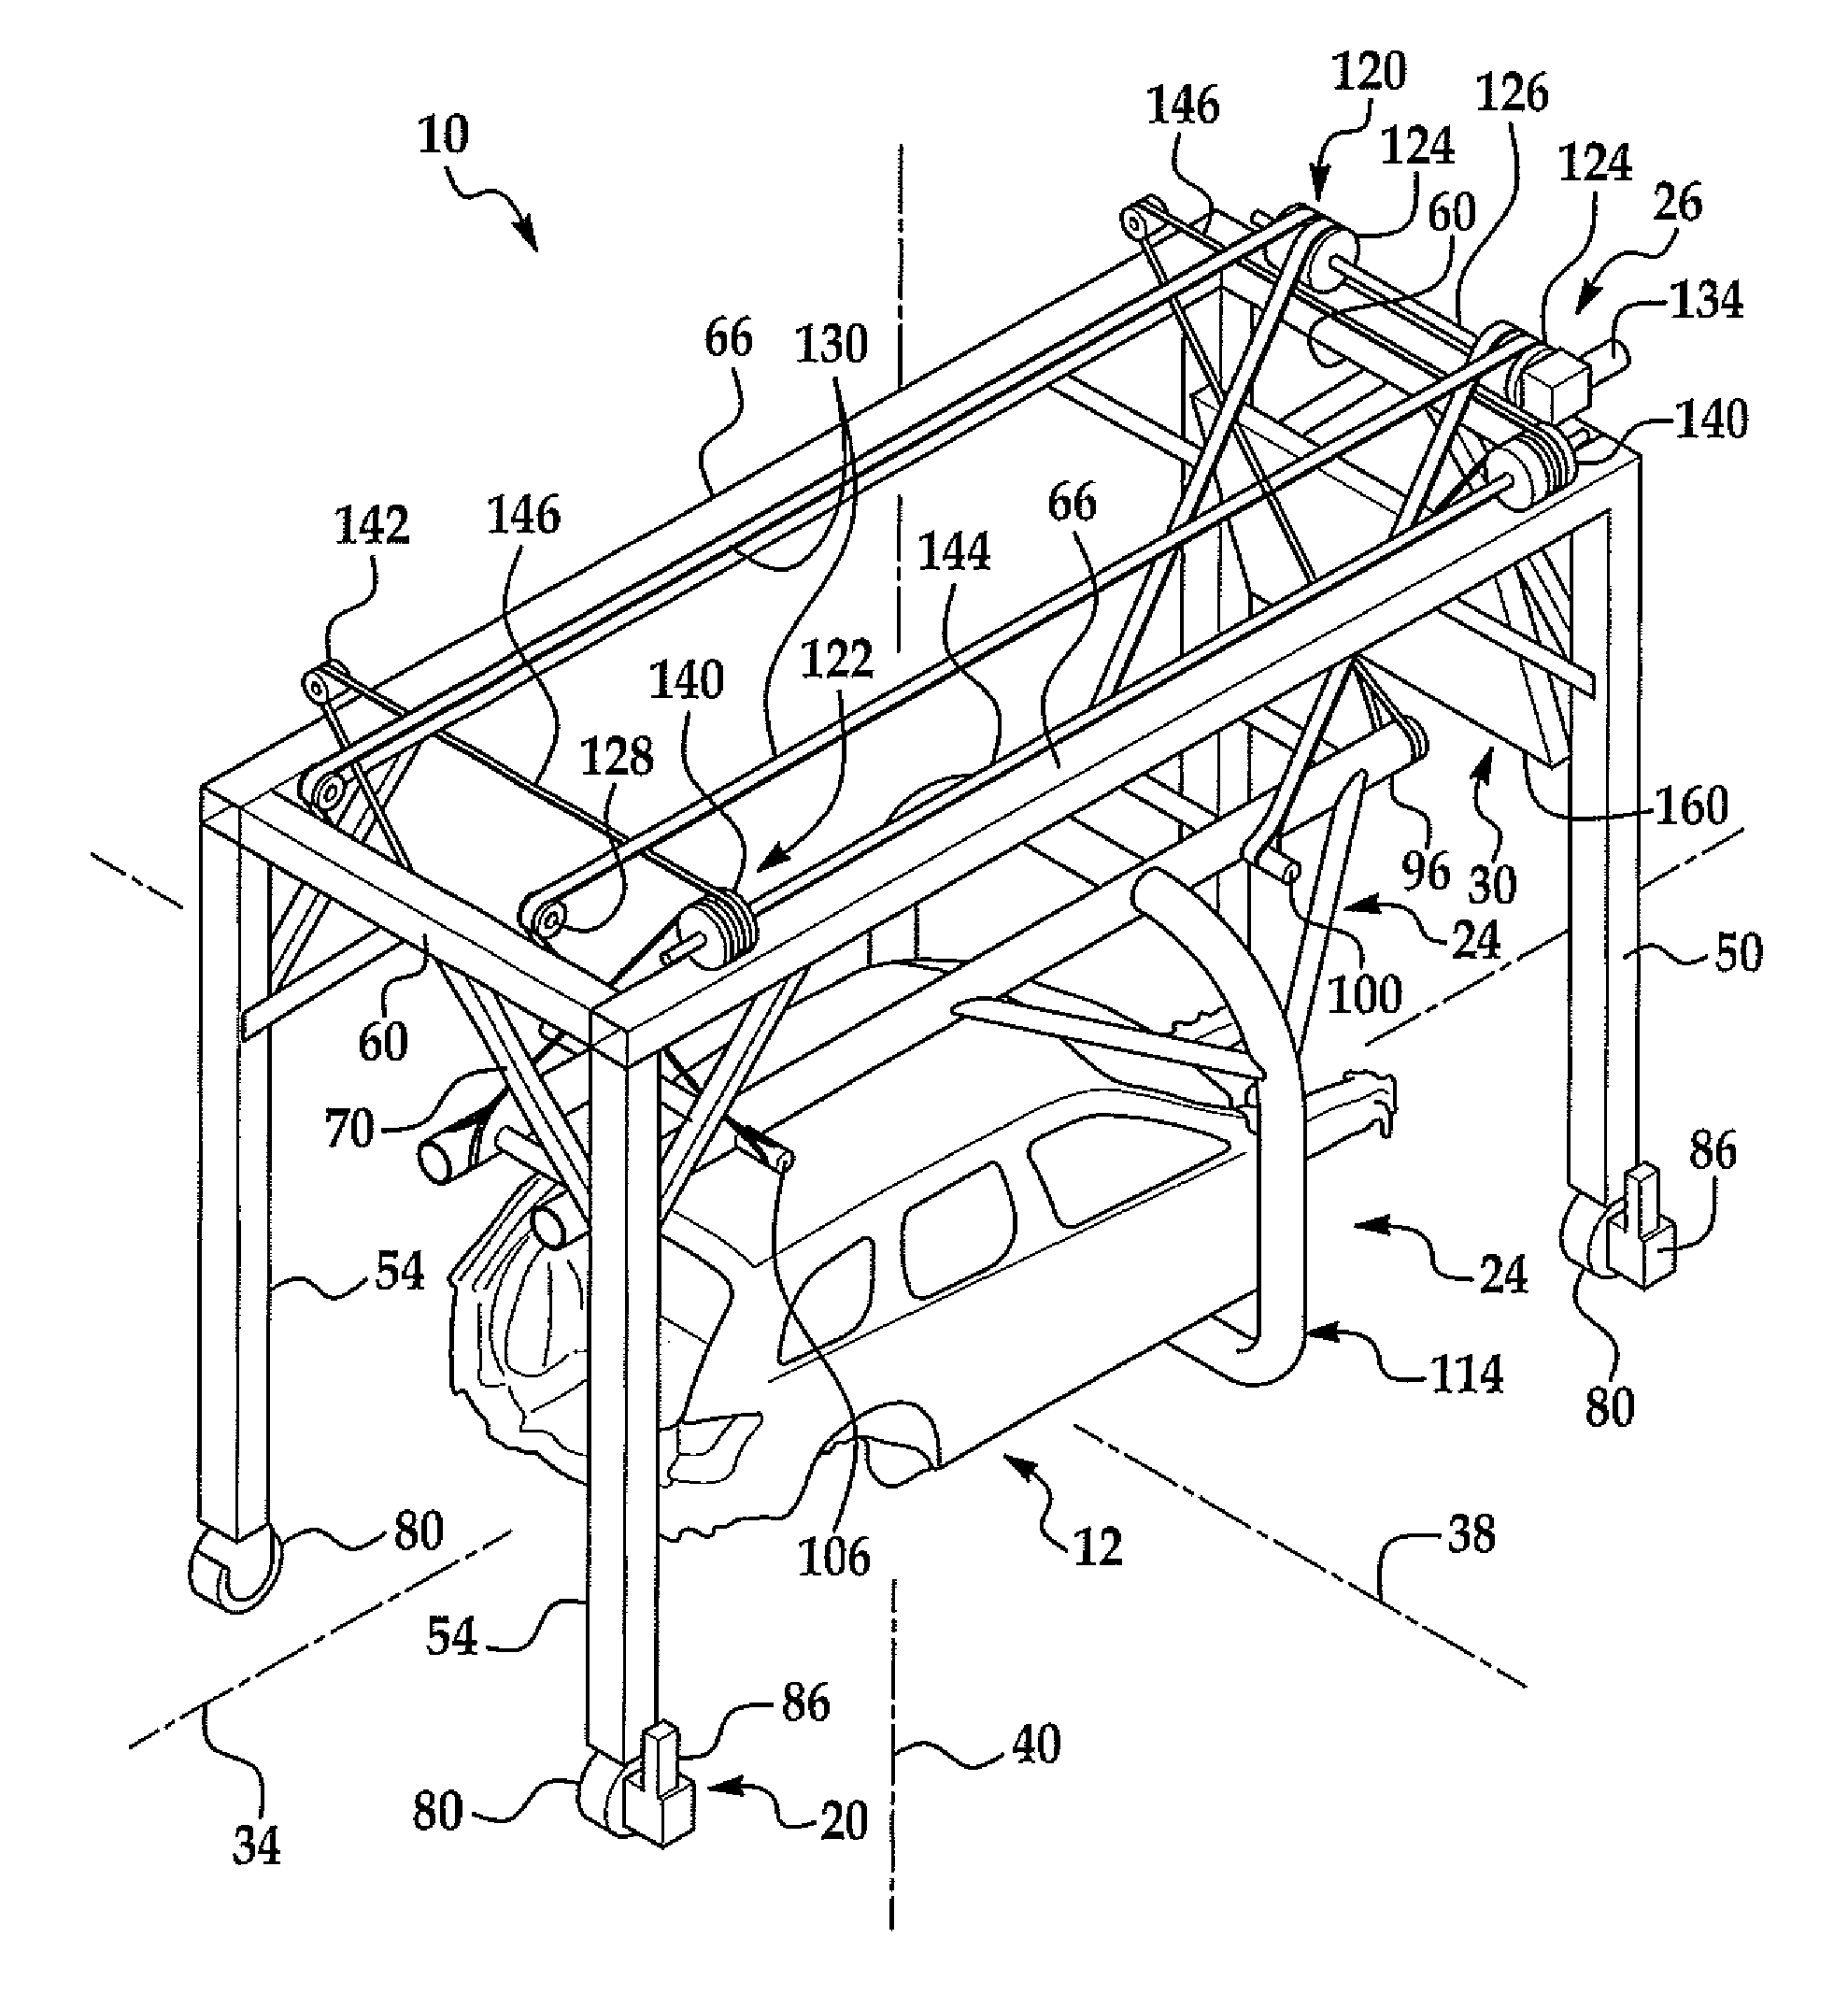 Final assembly machine and method of use